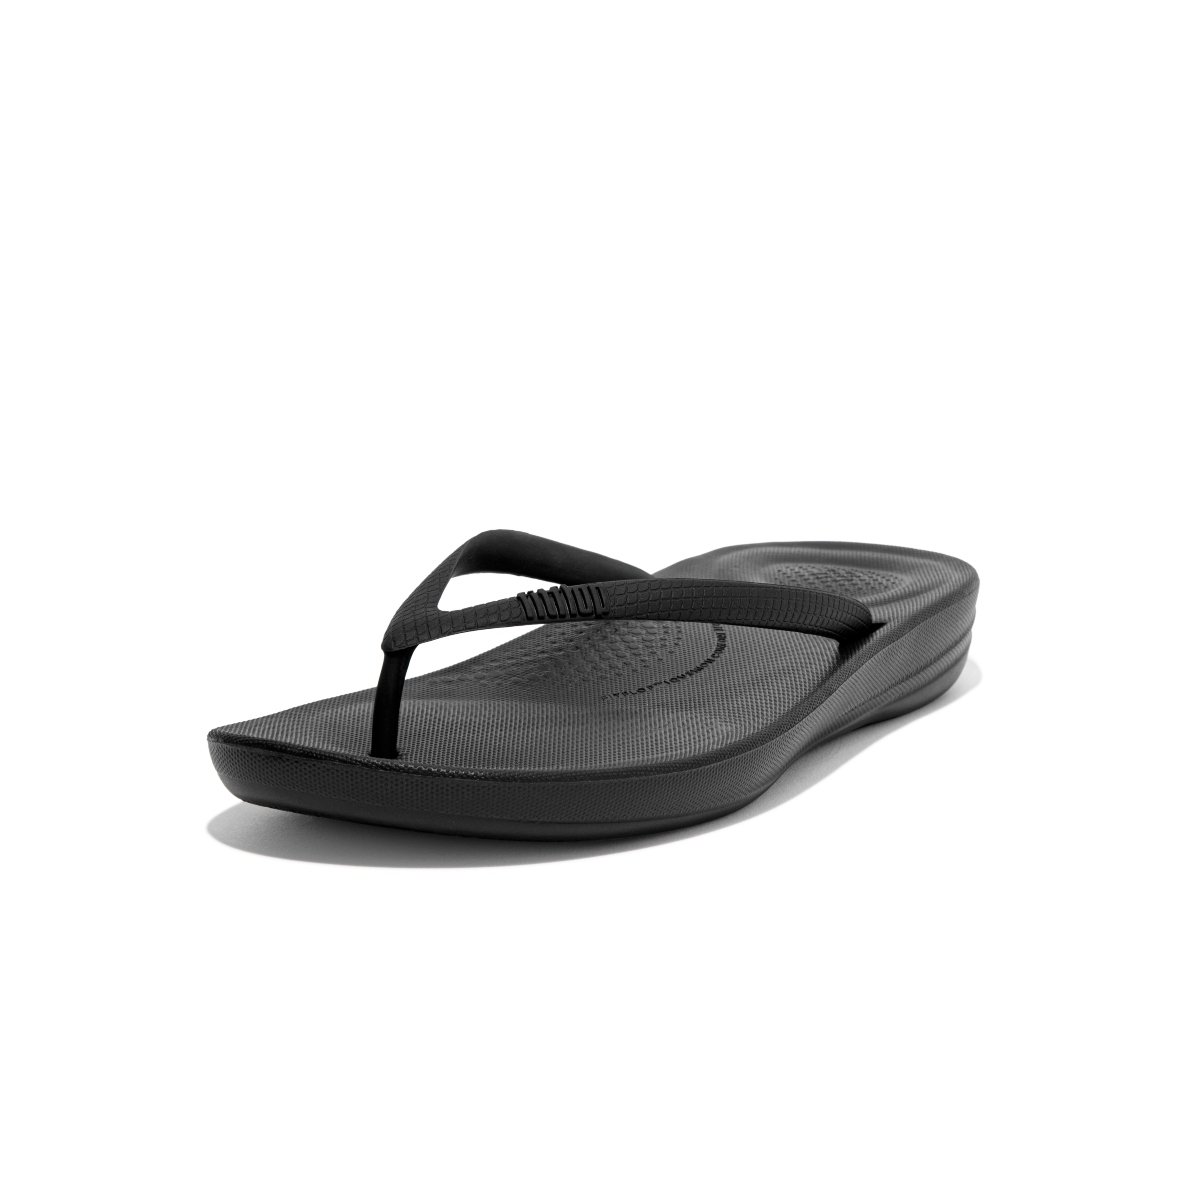 FitFlop iQUSHION Ergonomic Flip-Flops All Black side view 